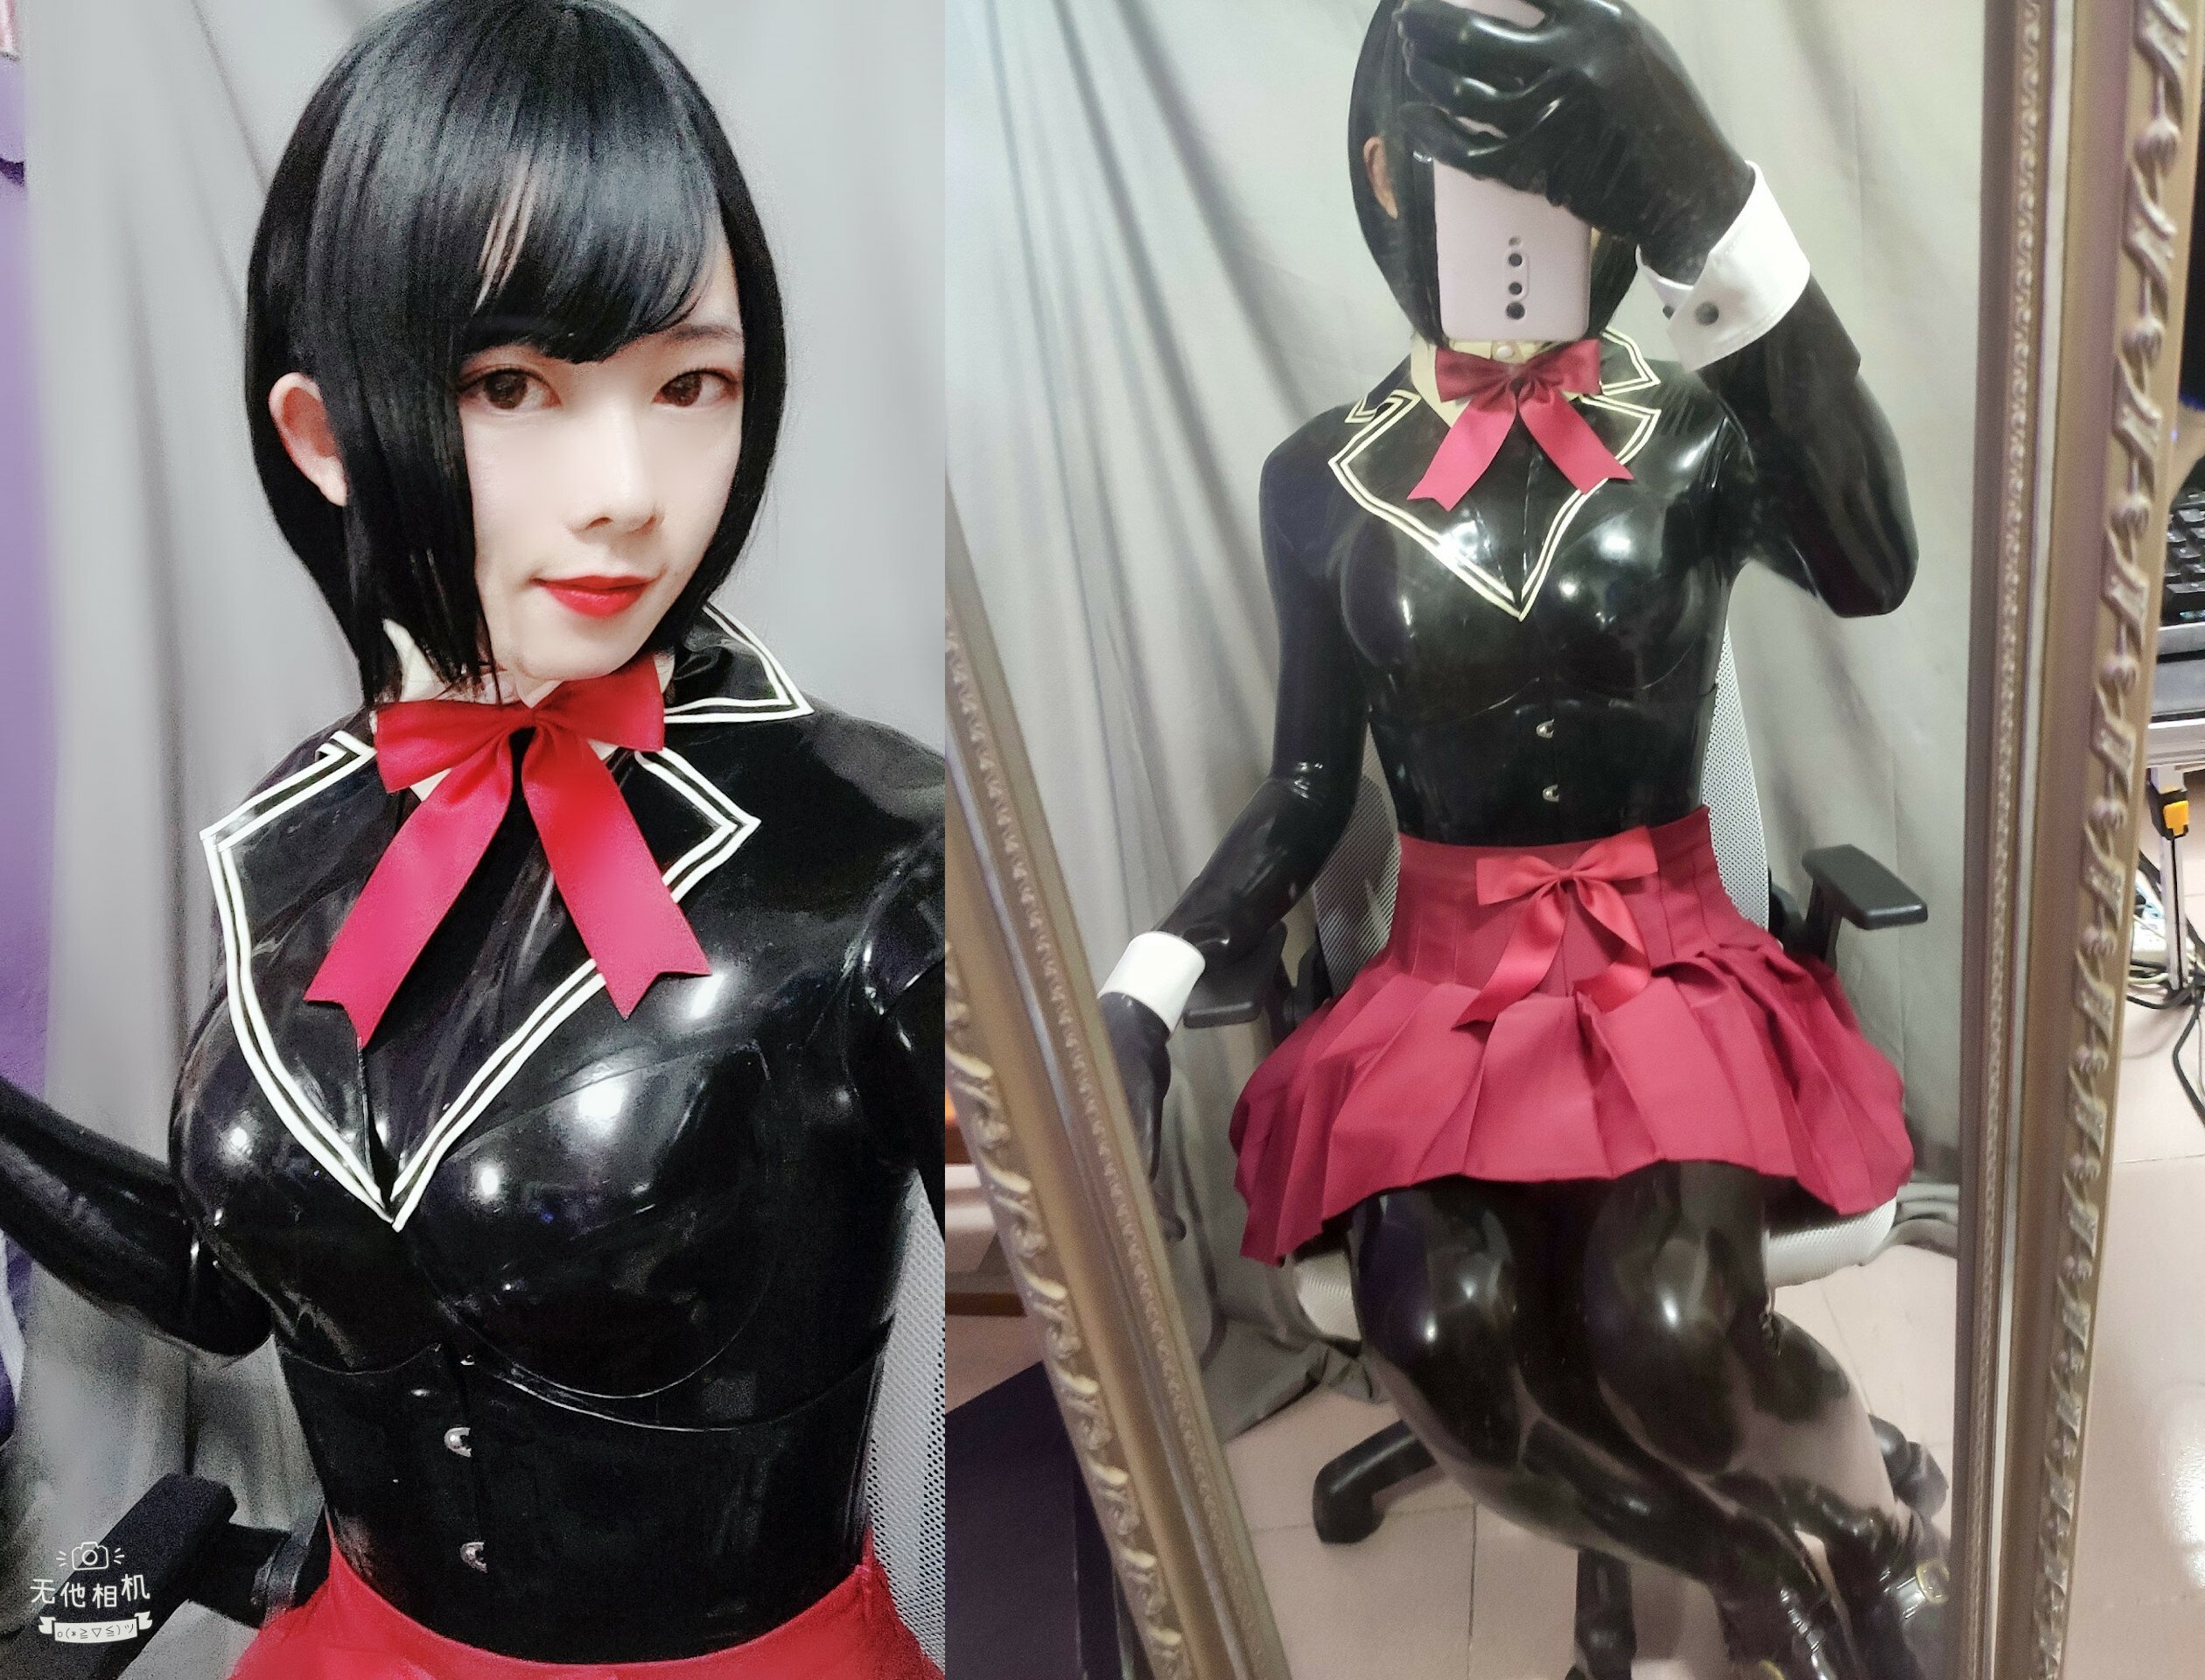 Showing off their new latex | Scrolller